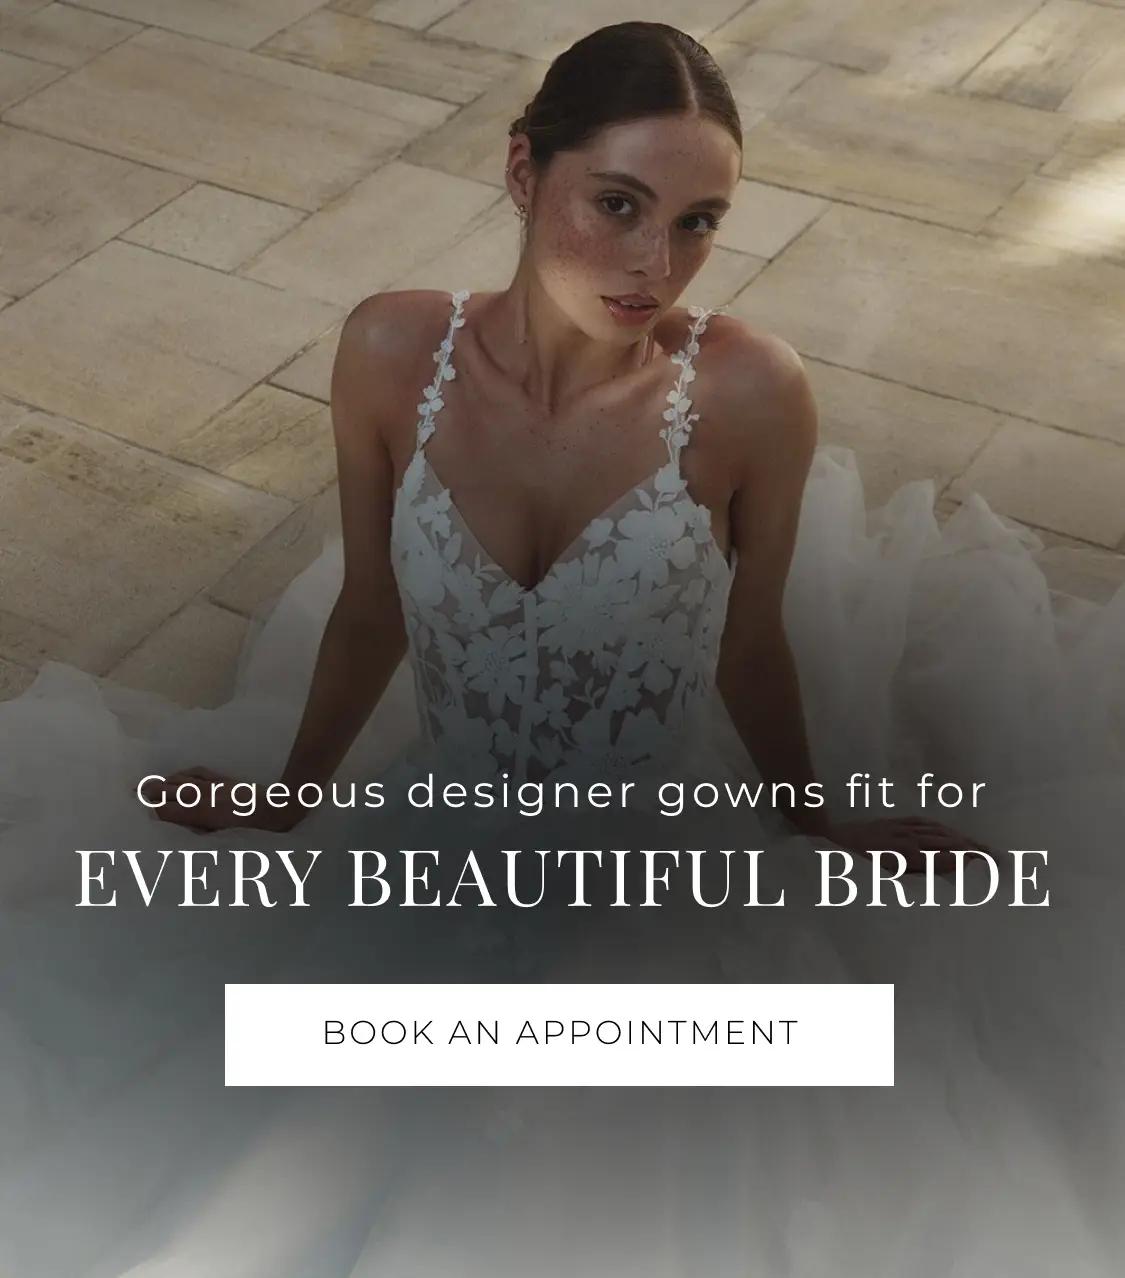 Every Beautiful Bride banner mobile